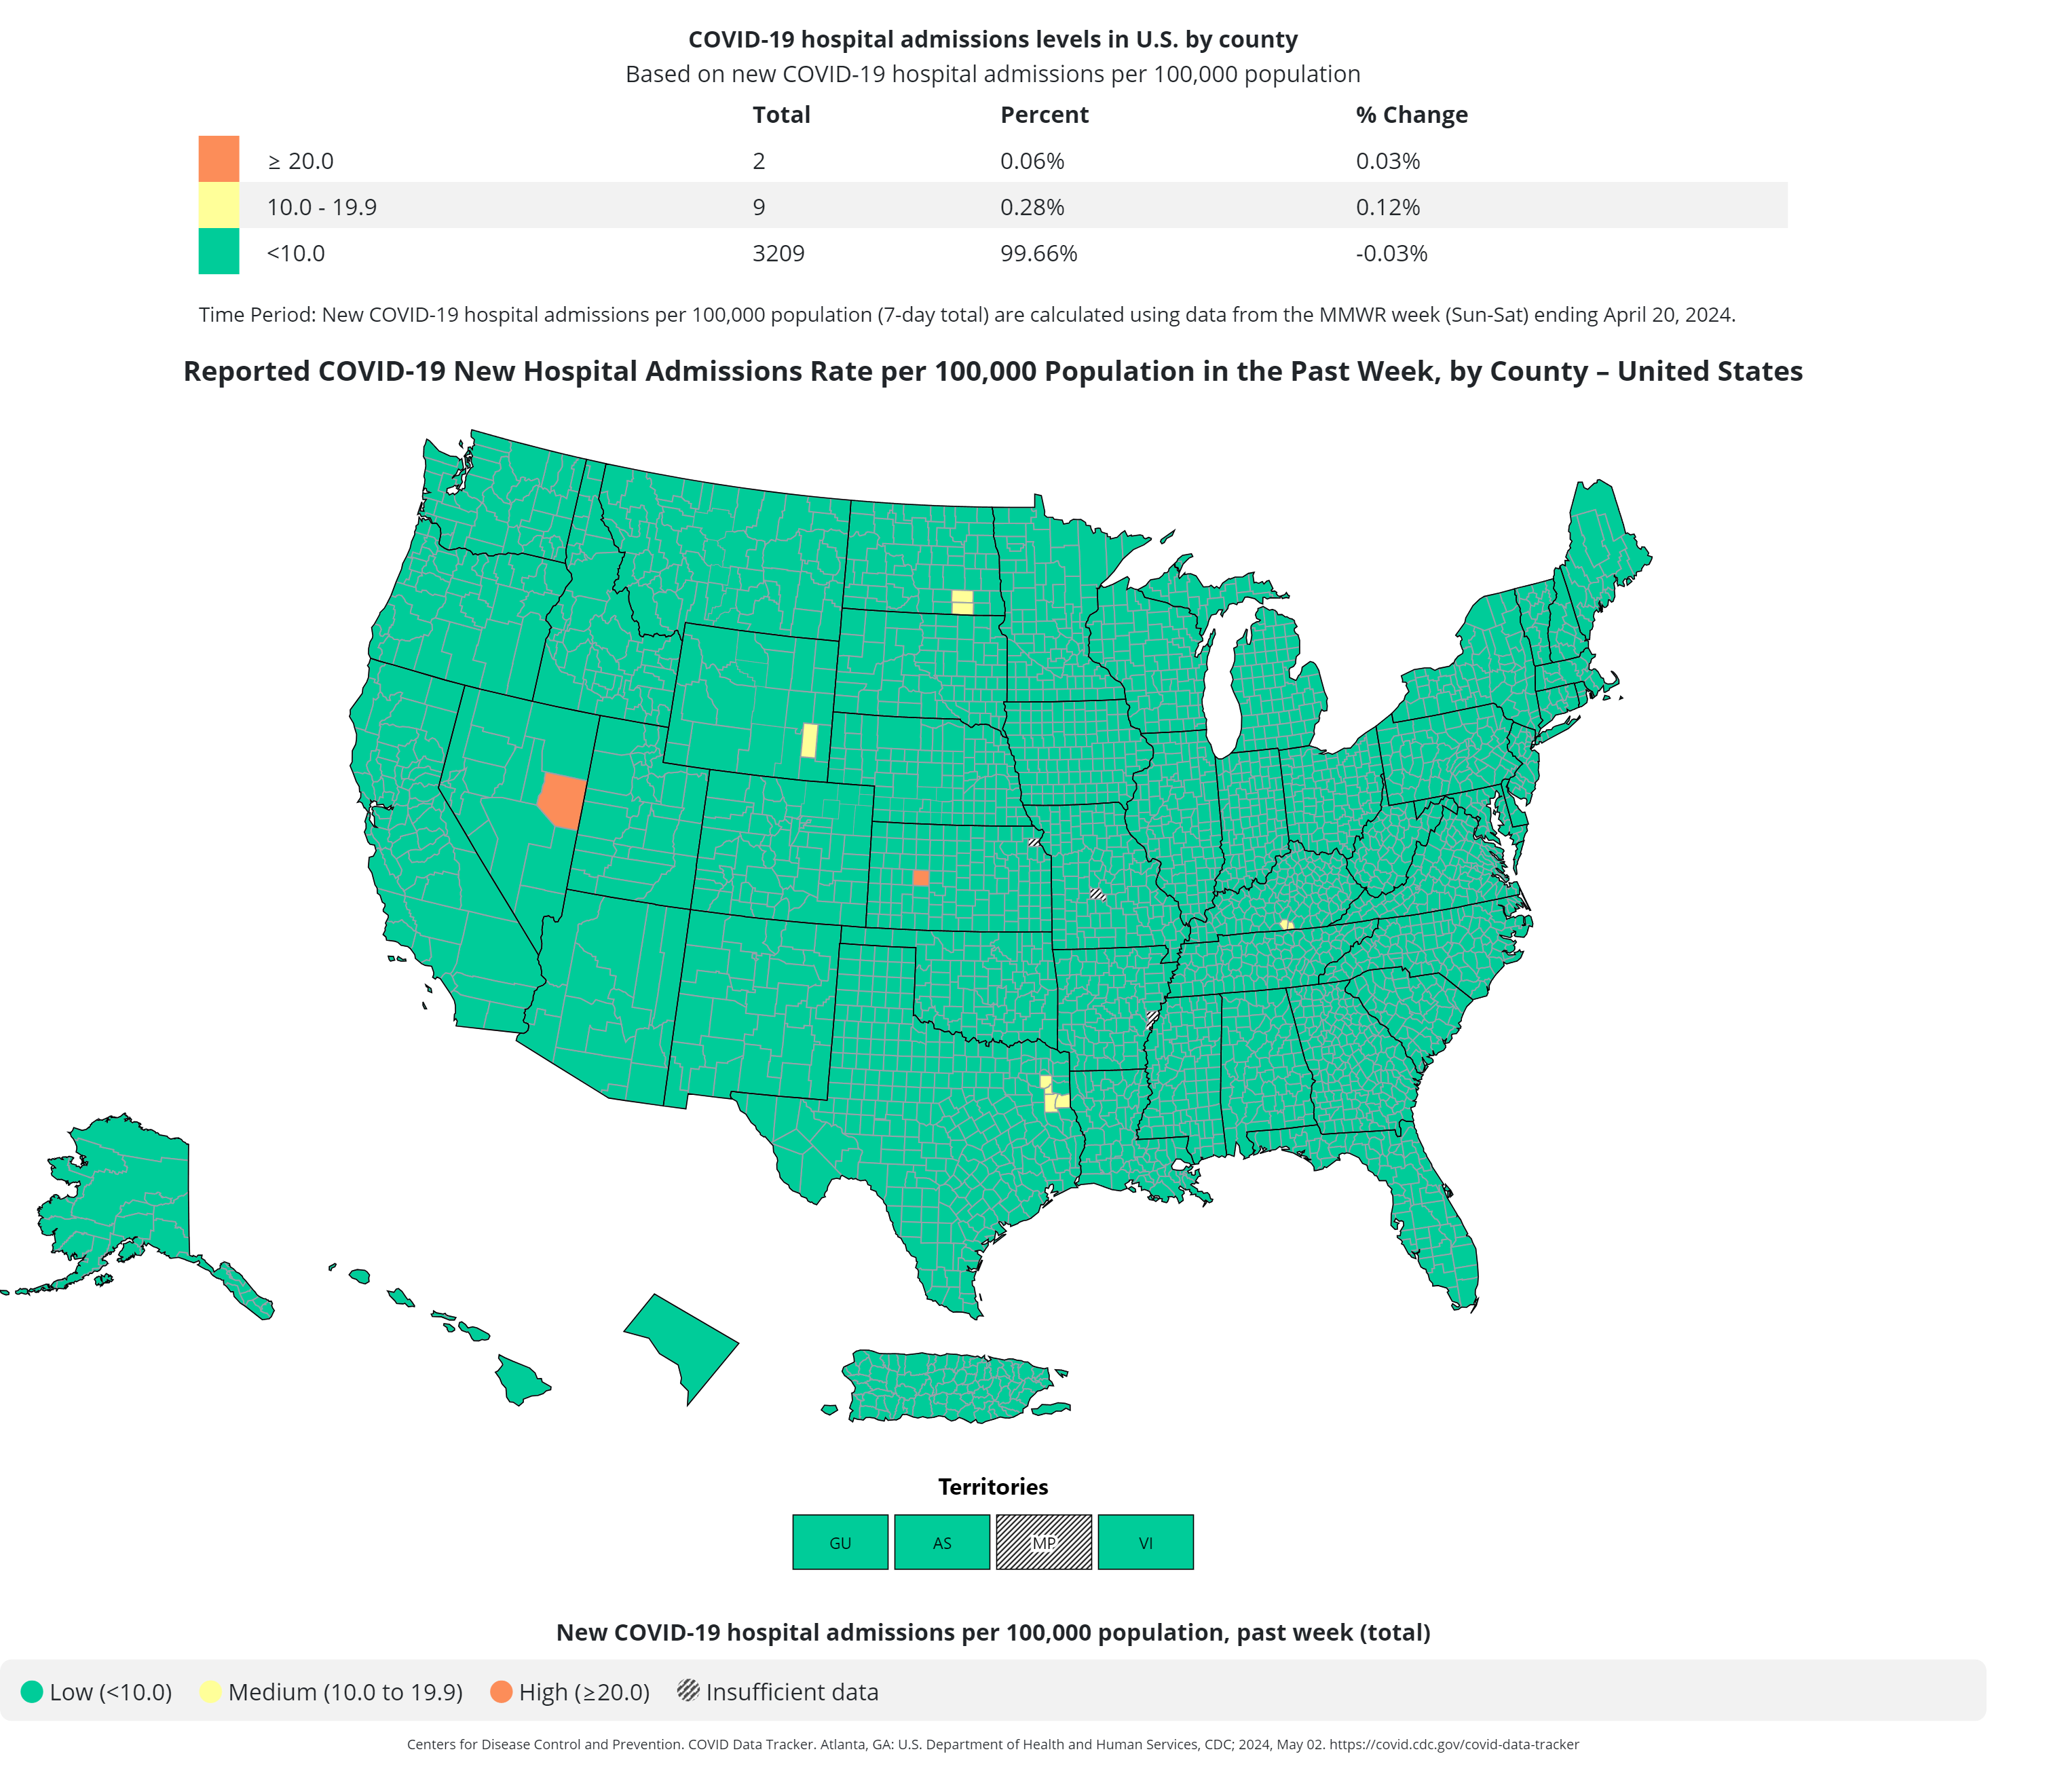 COVID-19 hospital admissions levels in U.S by county, data through April 20, 2024